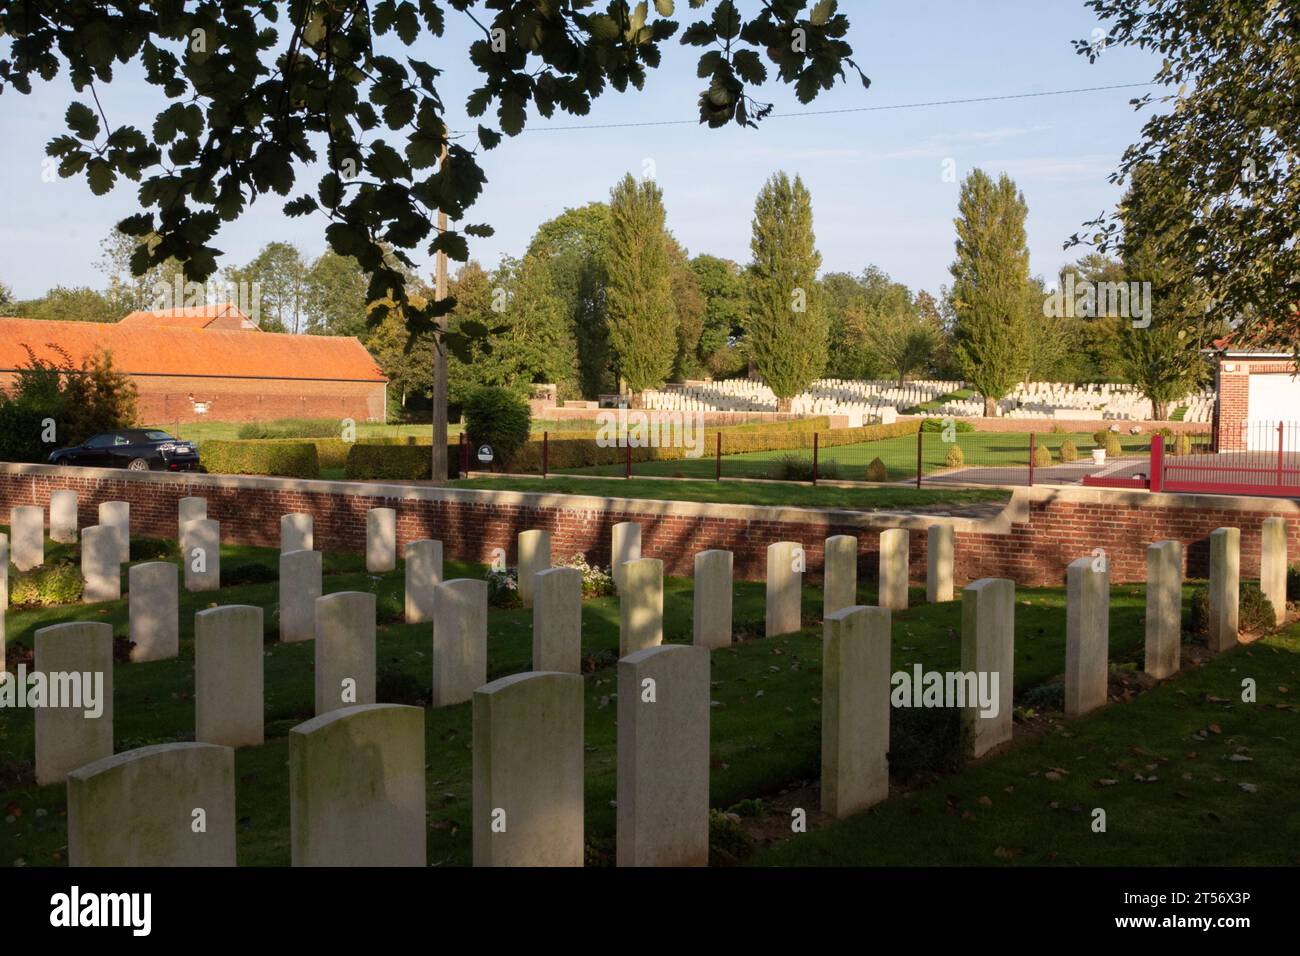 The WW1 Hermies British Cemetery and the Hermies Hill British Cemetery across the road under the poplar trees in northern France. Stock Photo